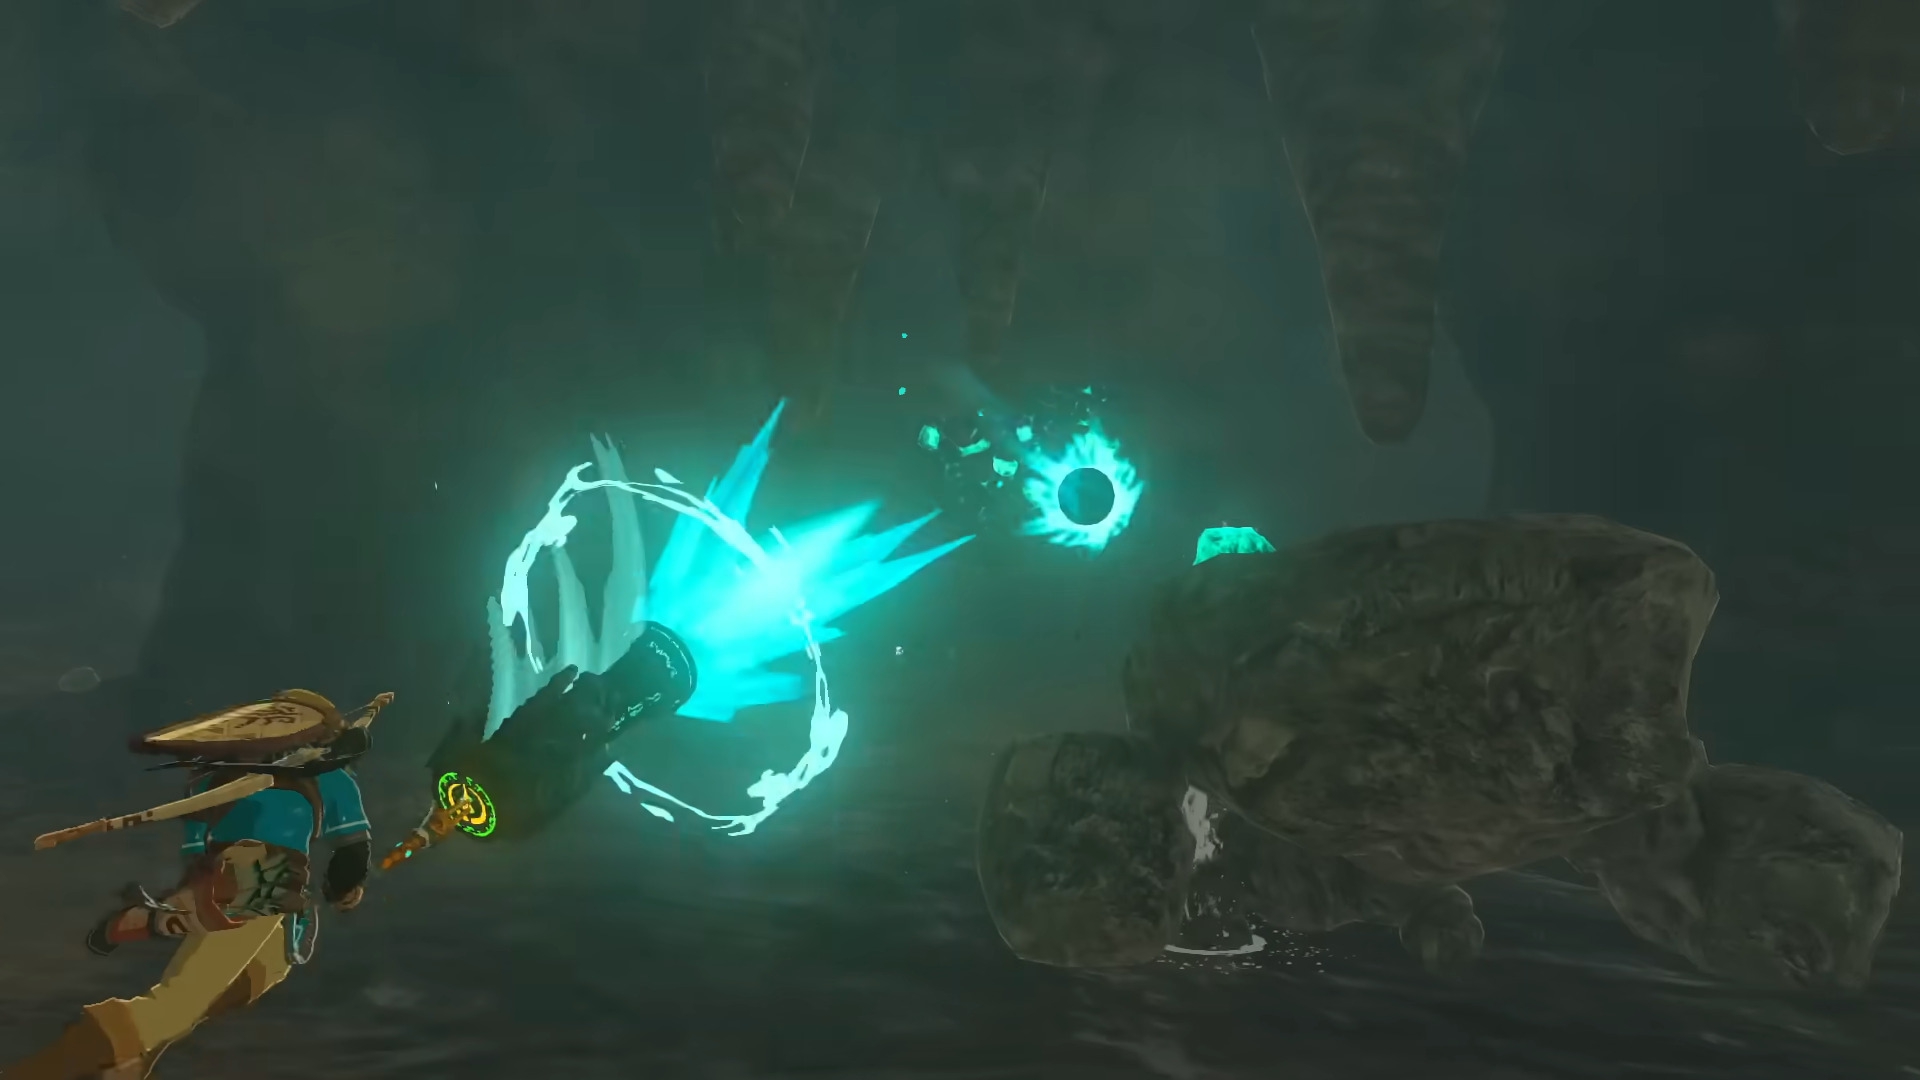 Link shooting what looks like a Sheikah cannonball over a talos in a cave